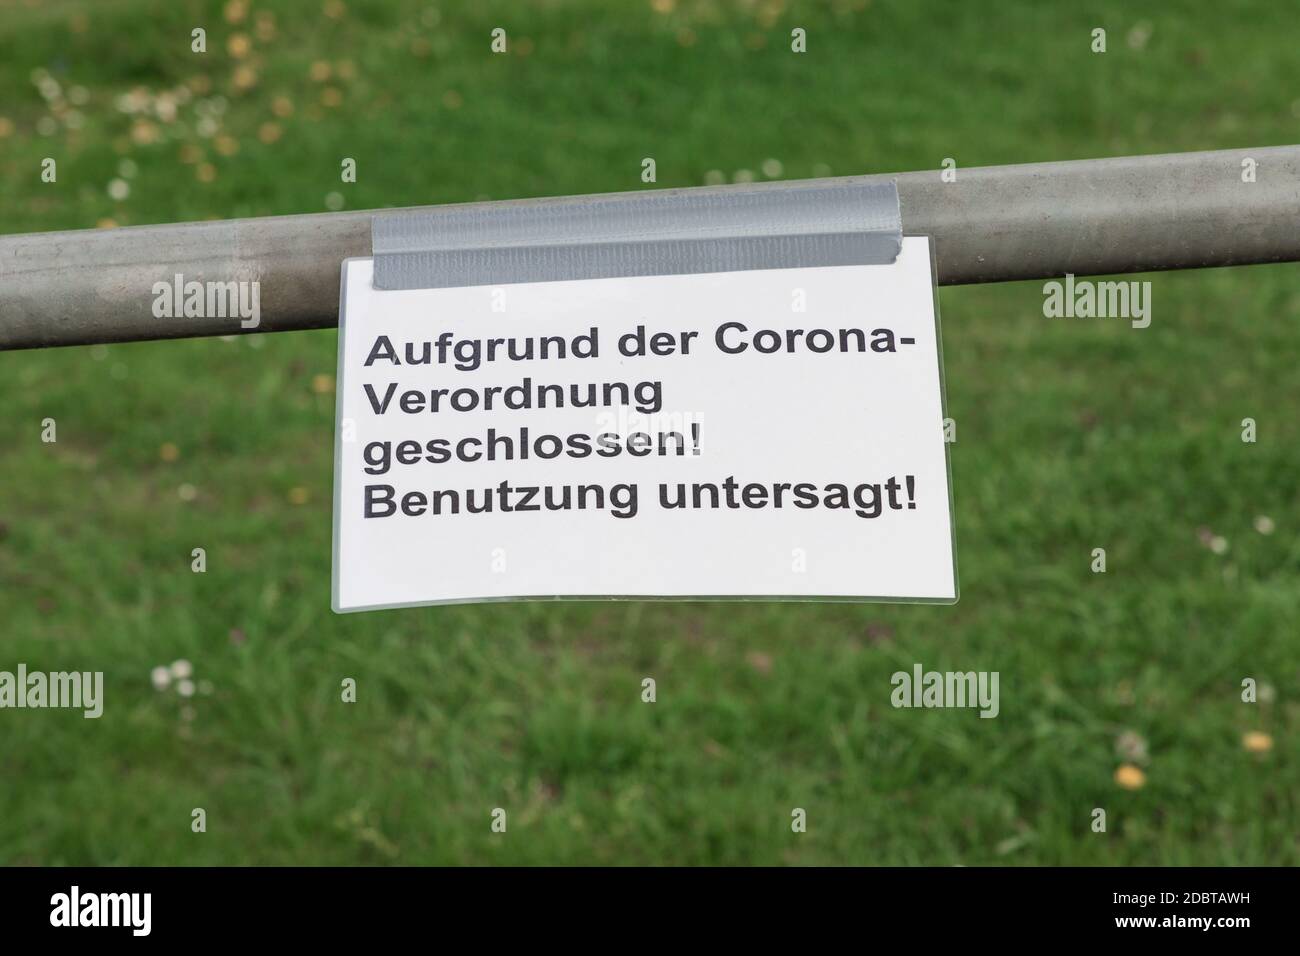 Covid-19 safety prevention. Closure prohibition sign. German text mean closed because of coronavirus restriction regulation! Keep off! Stock Photo